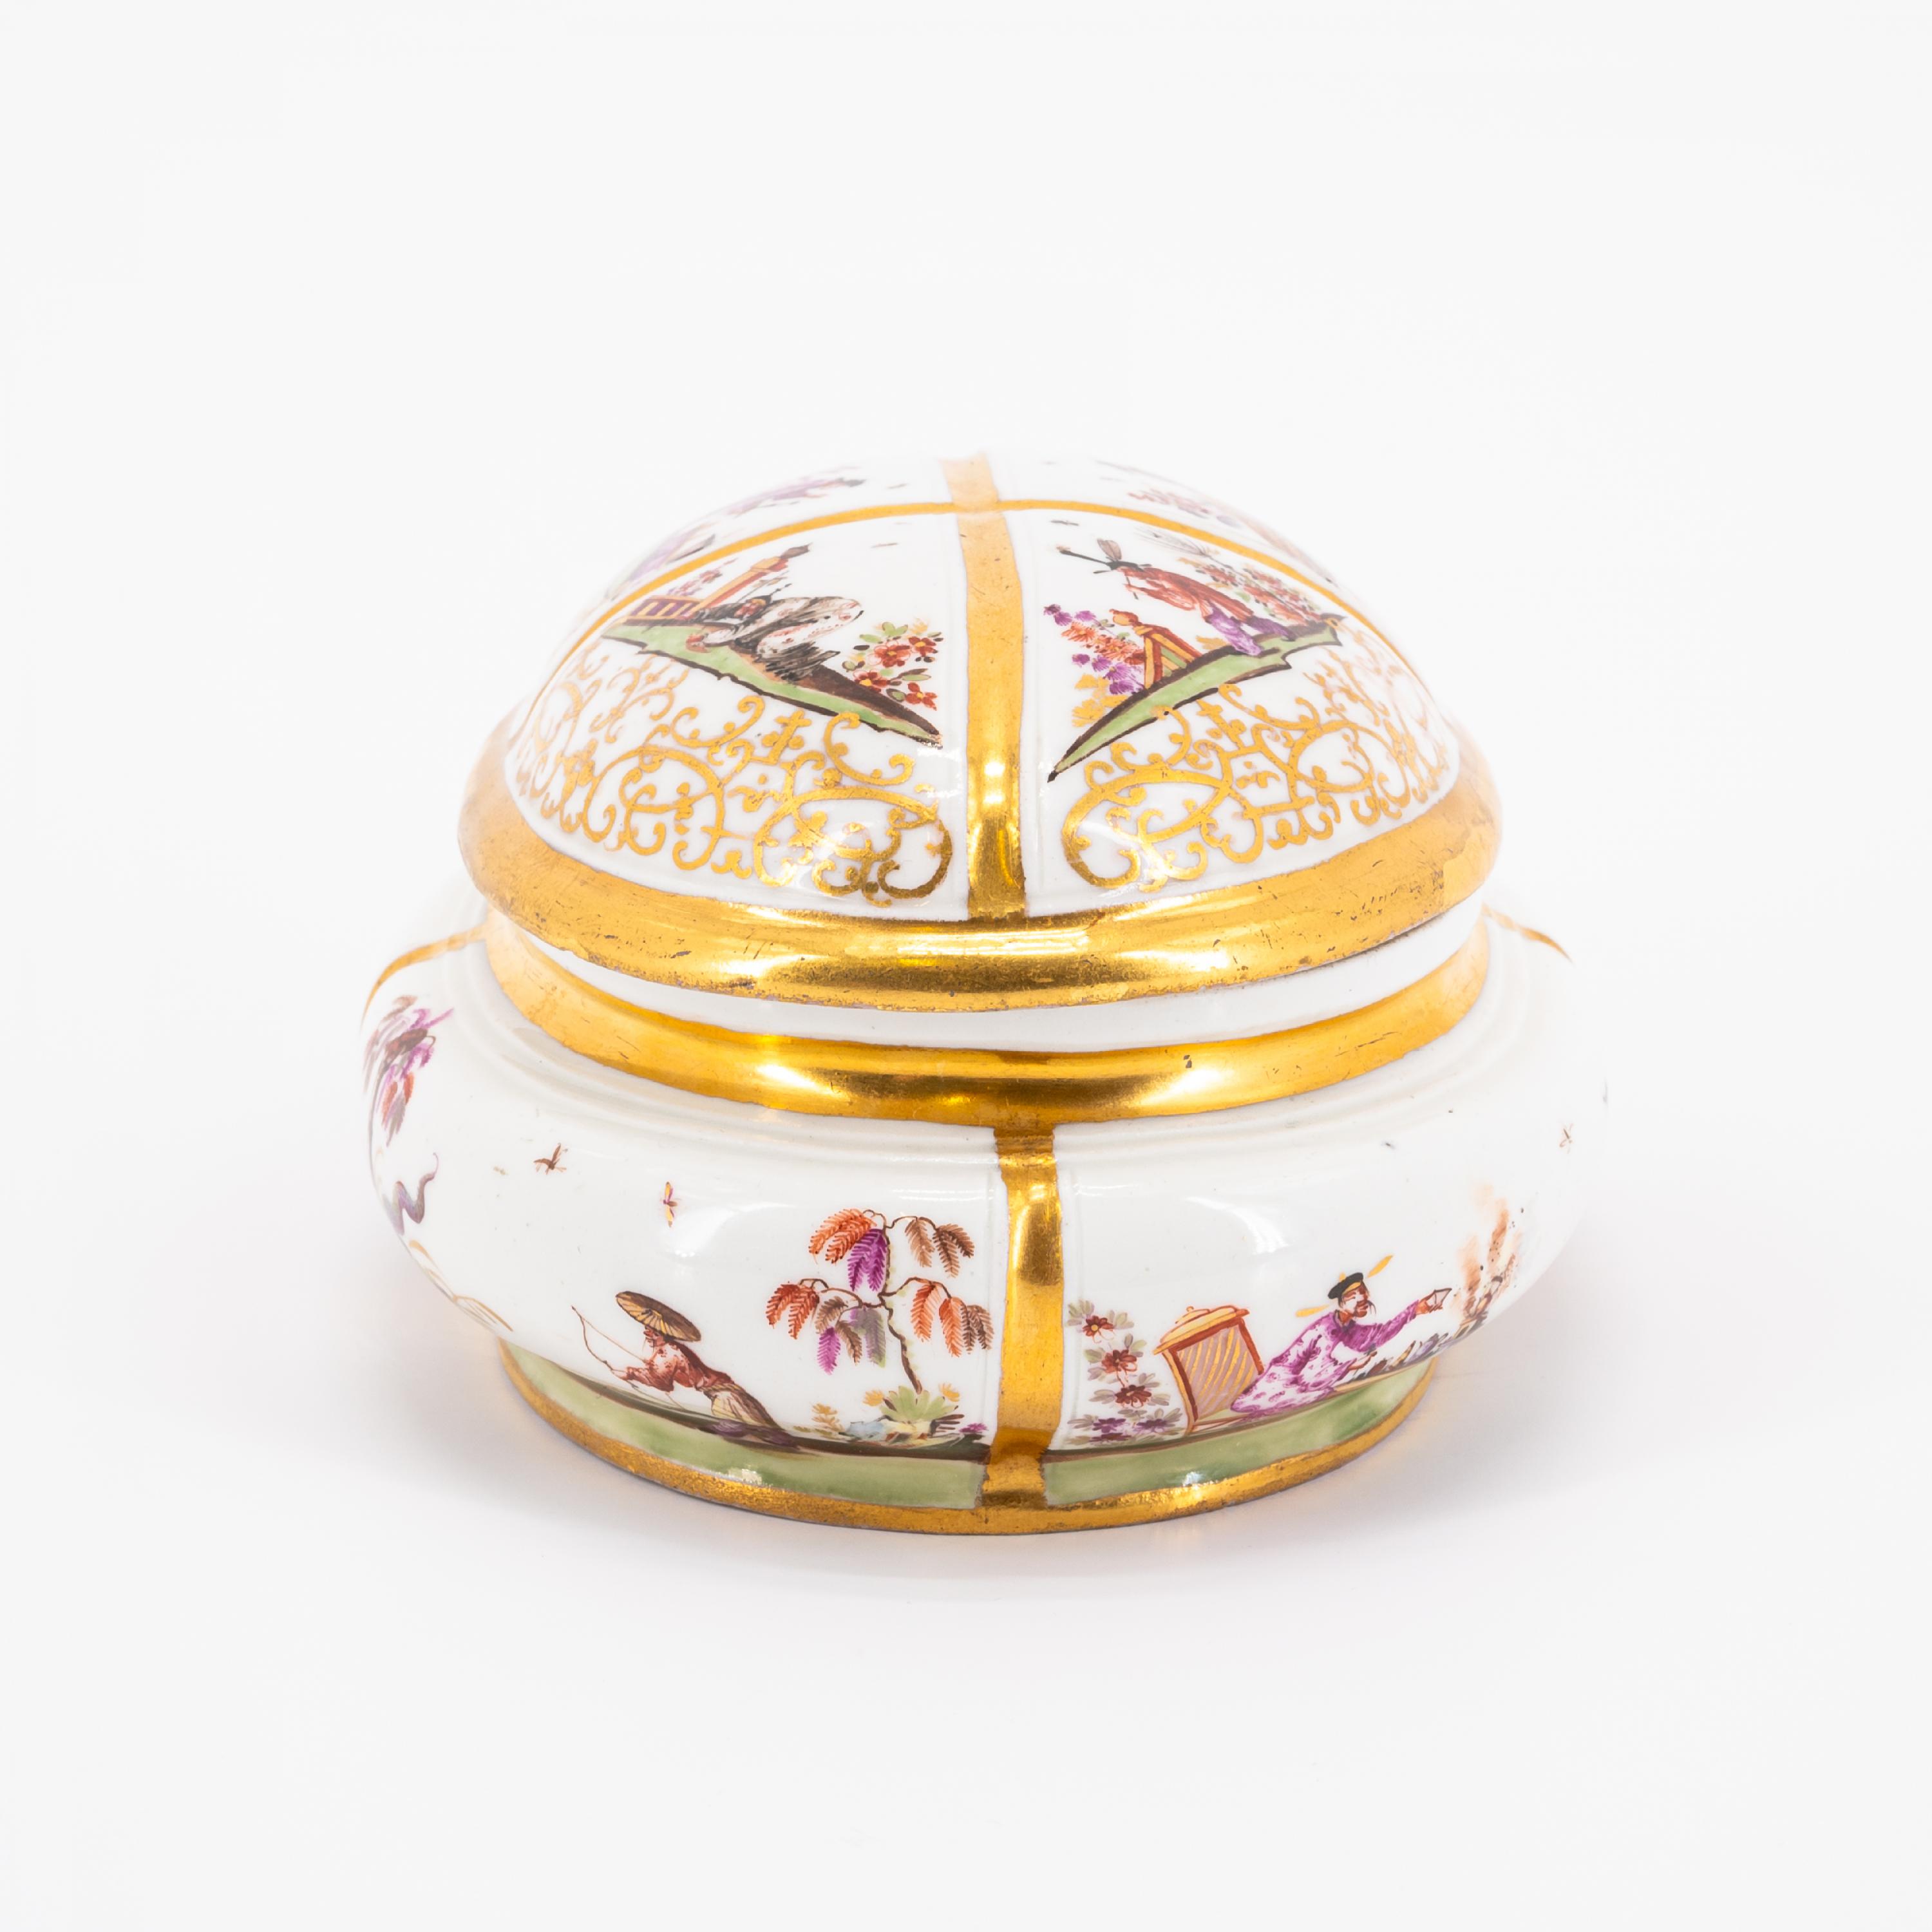 OVAL PORCELAIN SUGAR BOWL WITH CHINOISERIES - Image 5 of 7